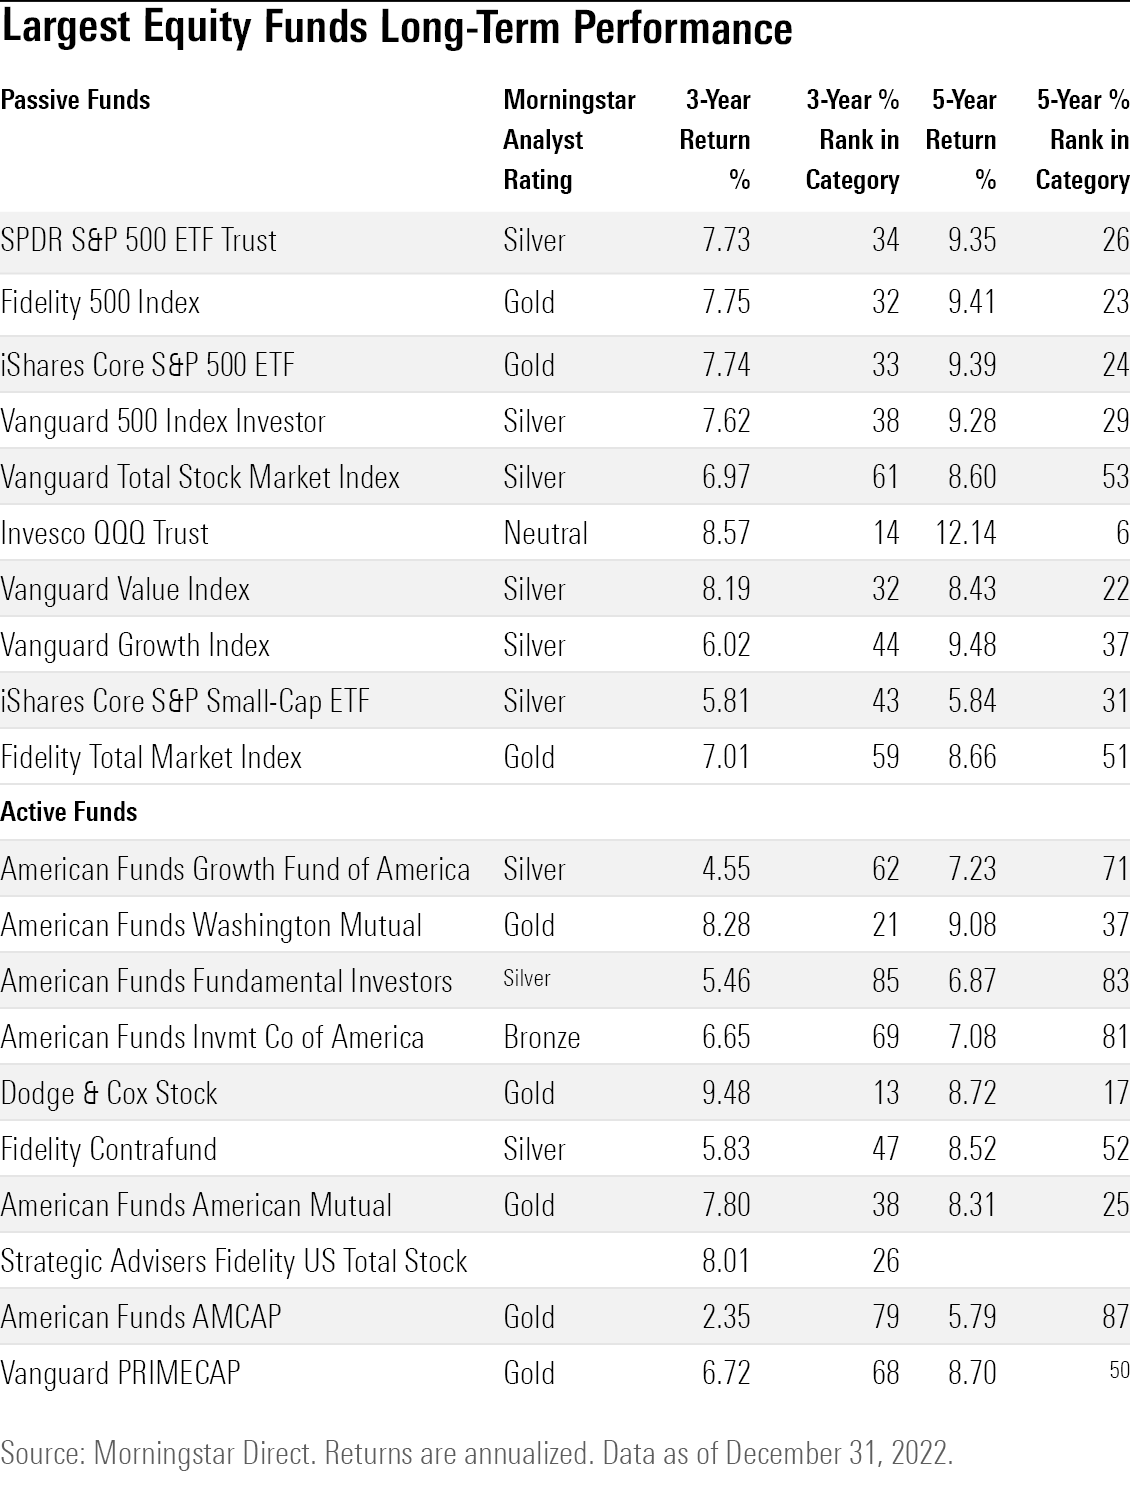 Table of the long term performance of the largest U.S. equity mutual funds and exchange-traded funds